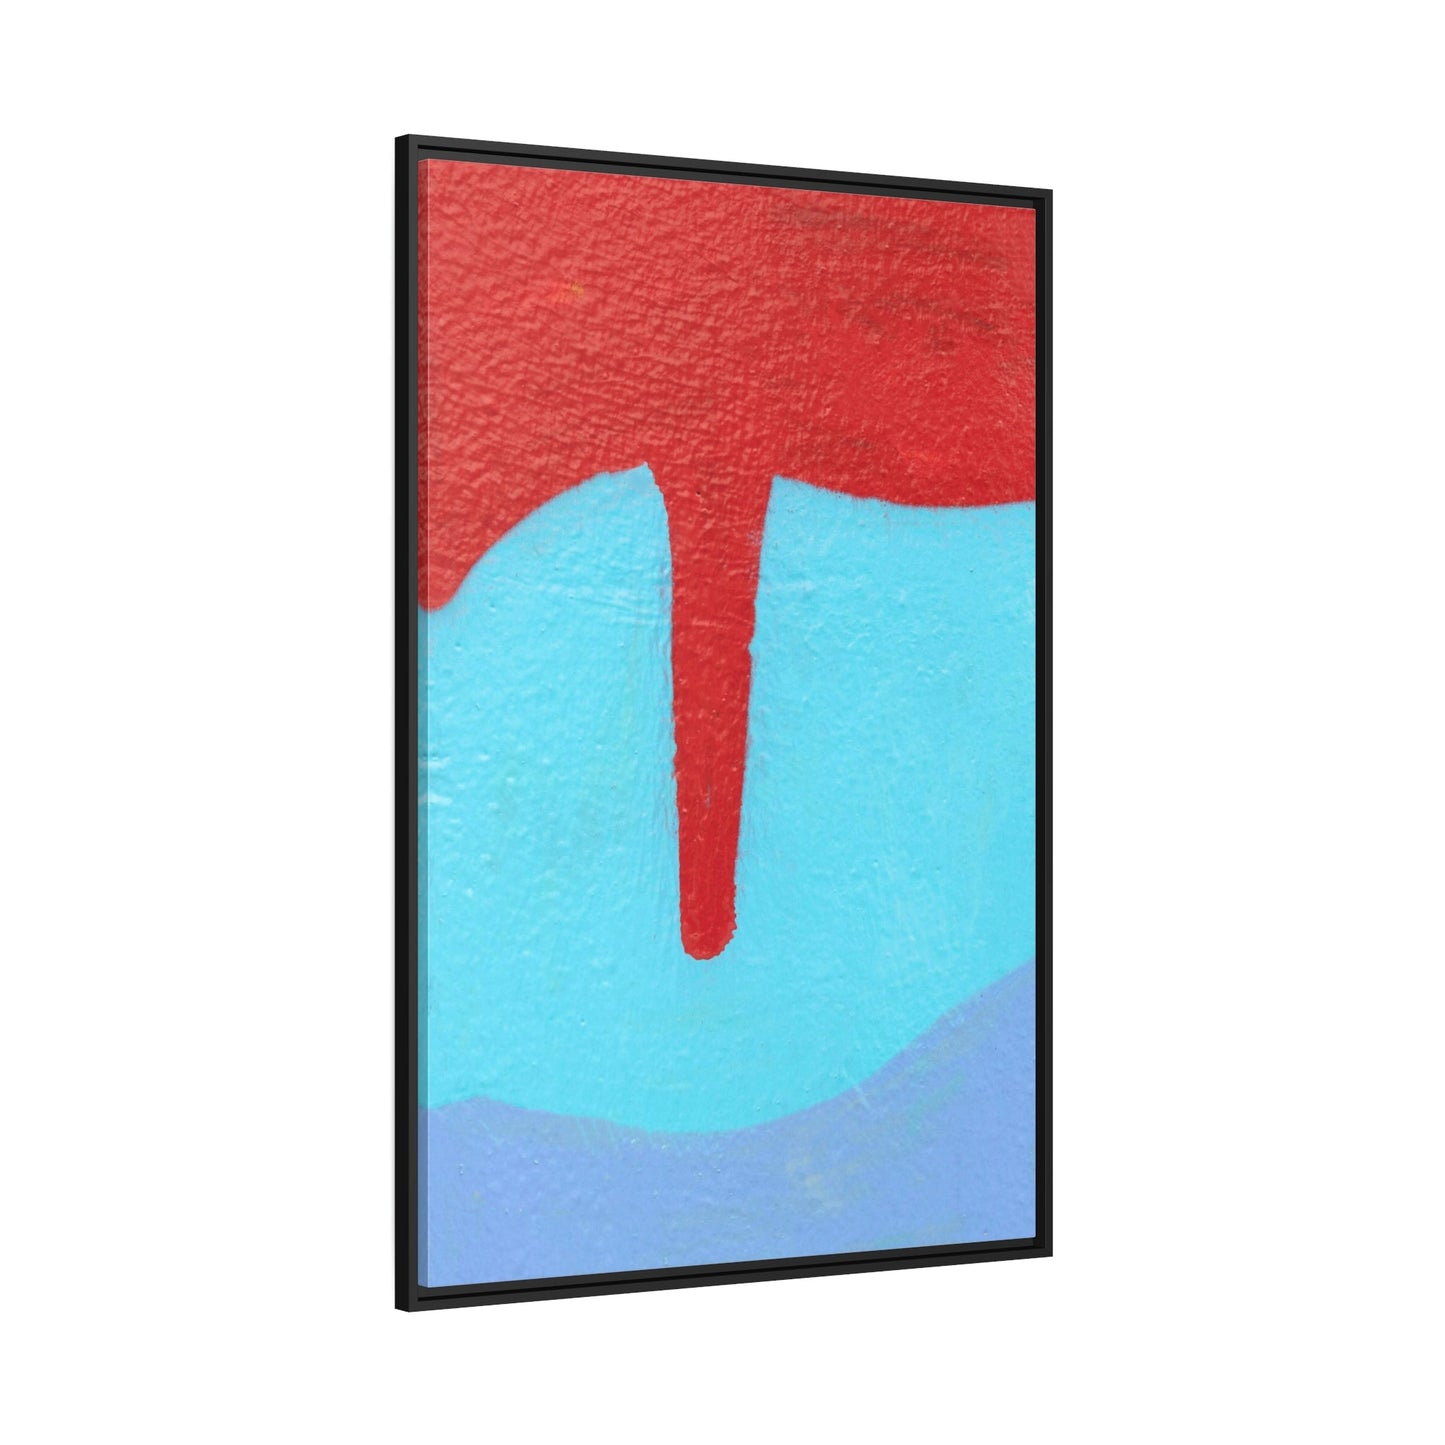 Street Art in your Home: Framed Poster with Abstract Graffiti